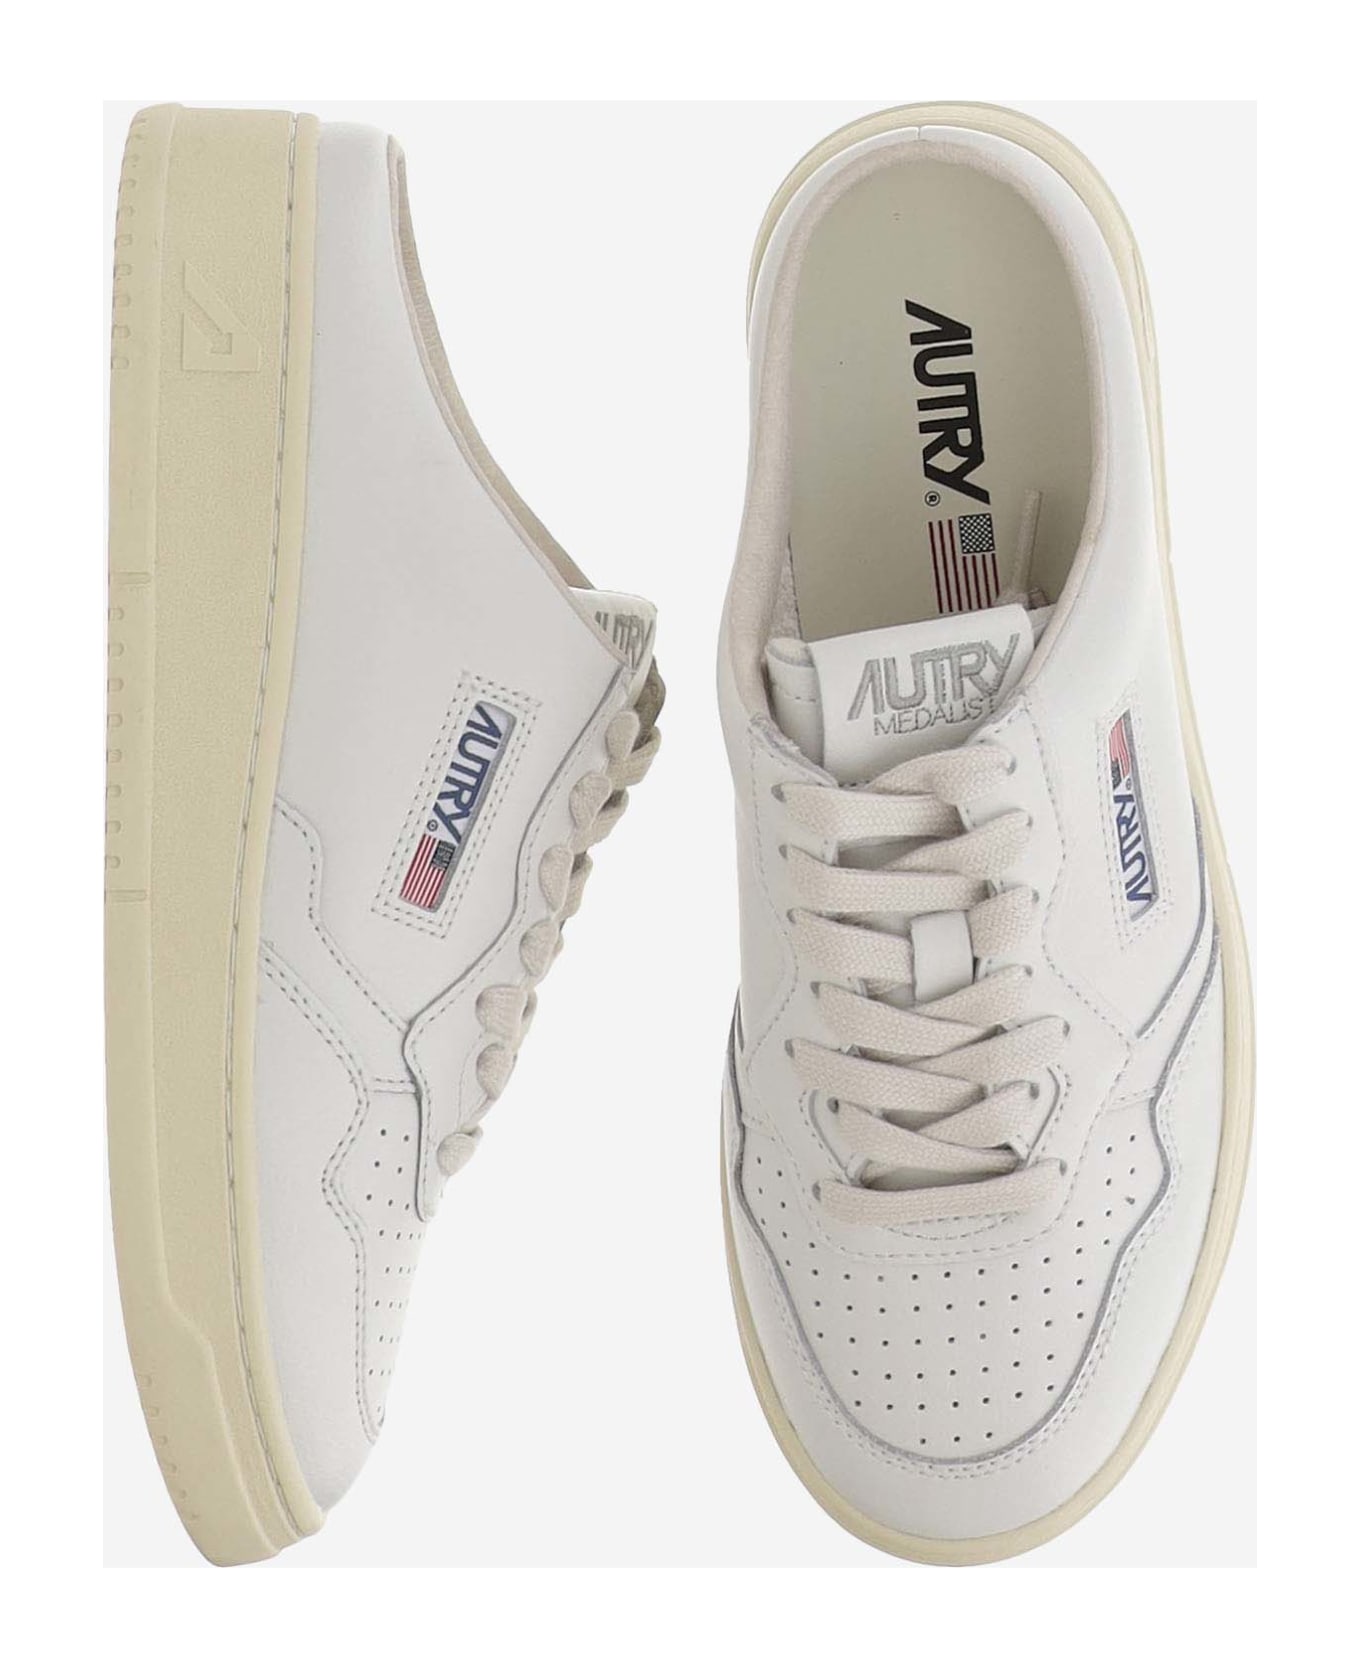 Autry Medalist Mule Low Leather Sneakers - Wht/wht